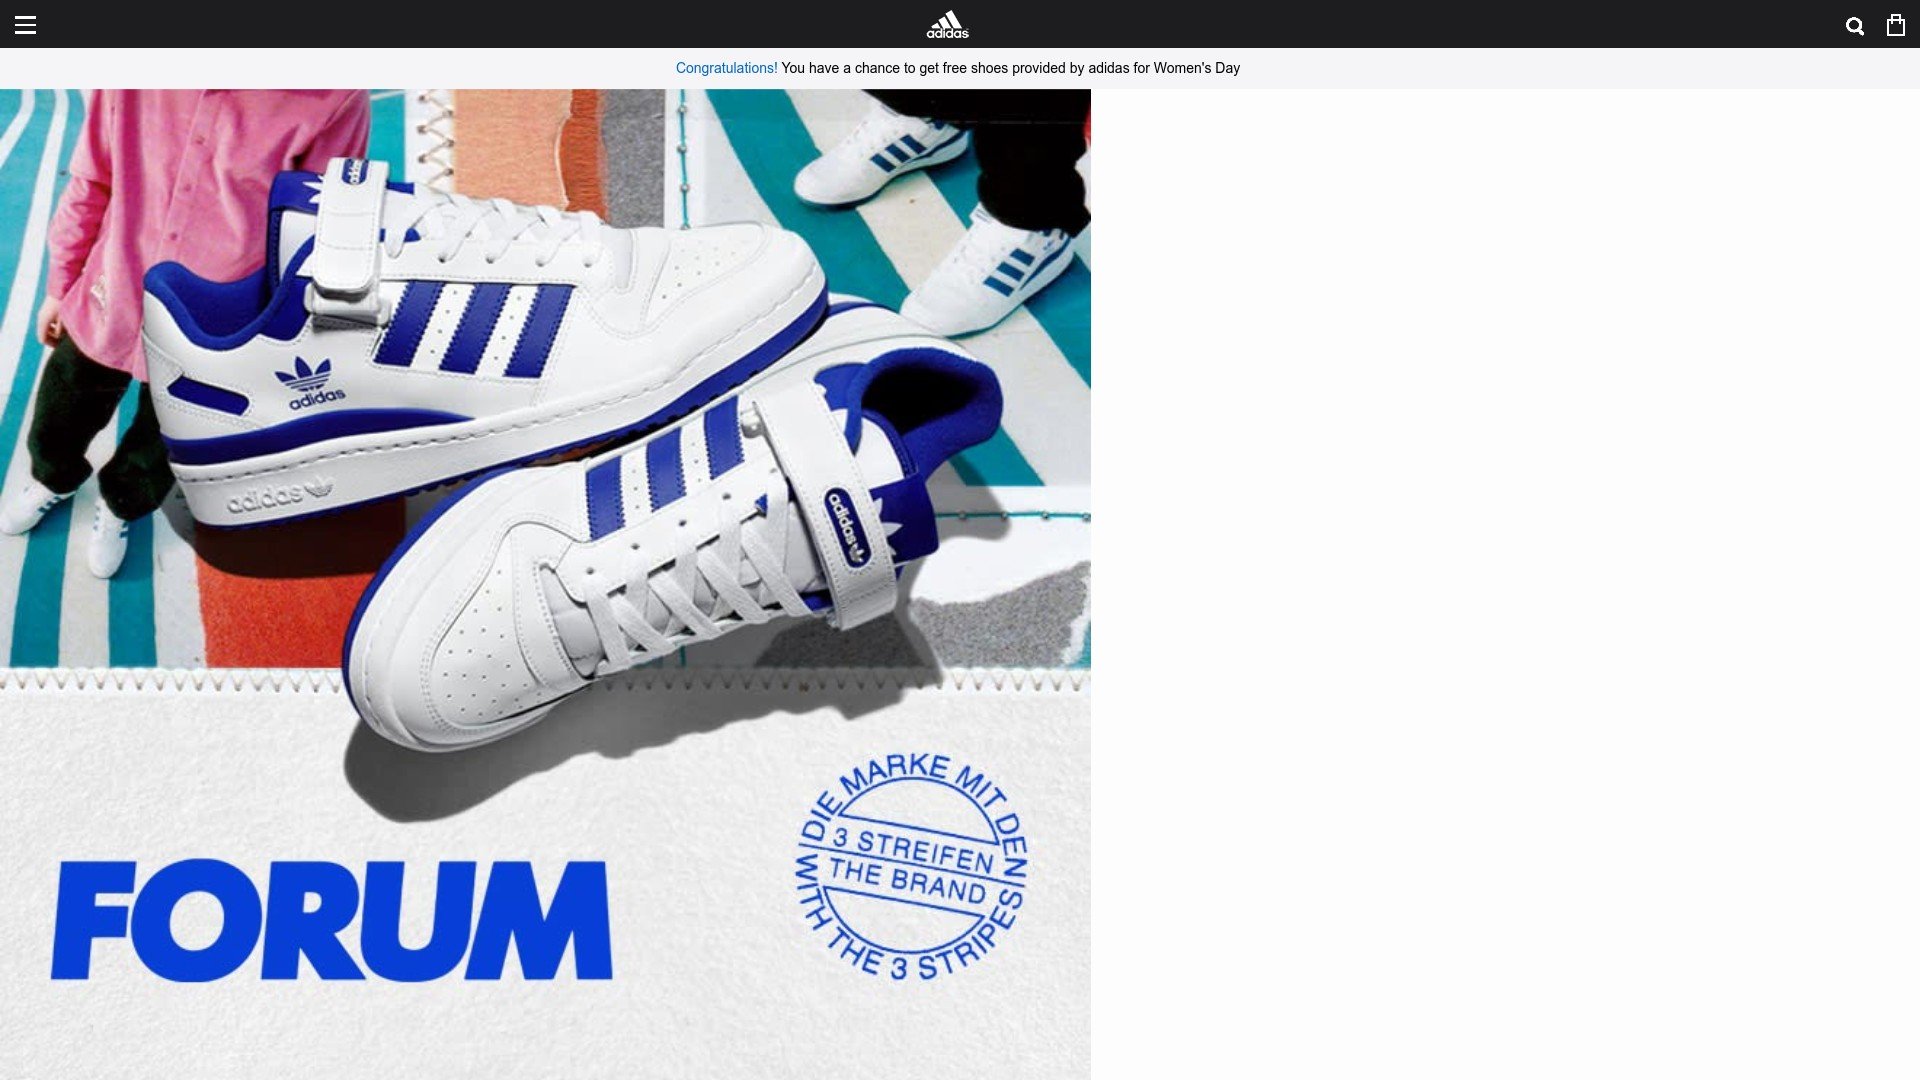 Adidas Free Shoes Scam - Fae WhatsApp Womens Day Gift